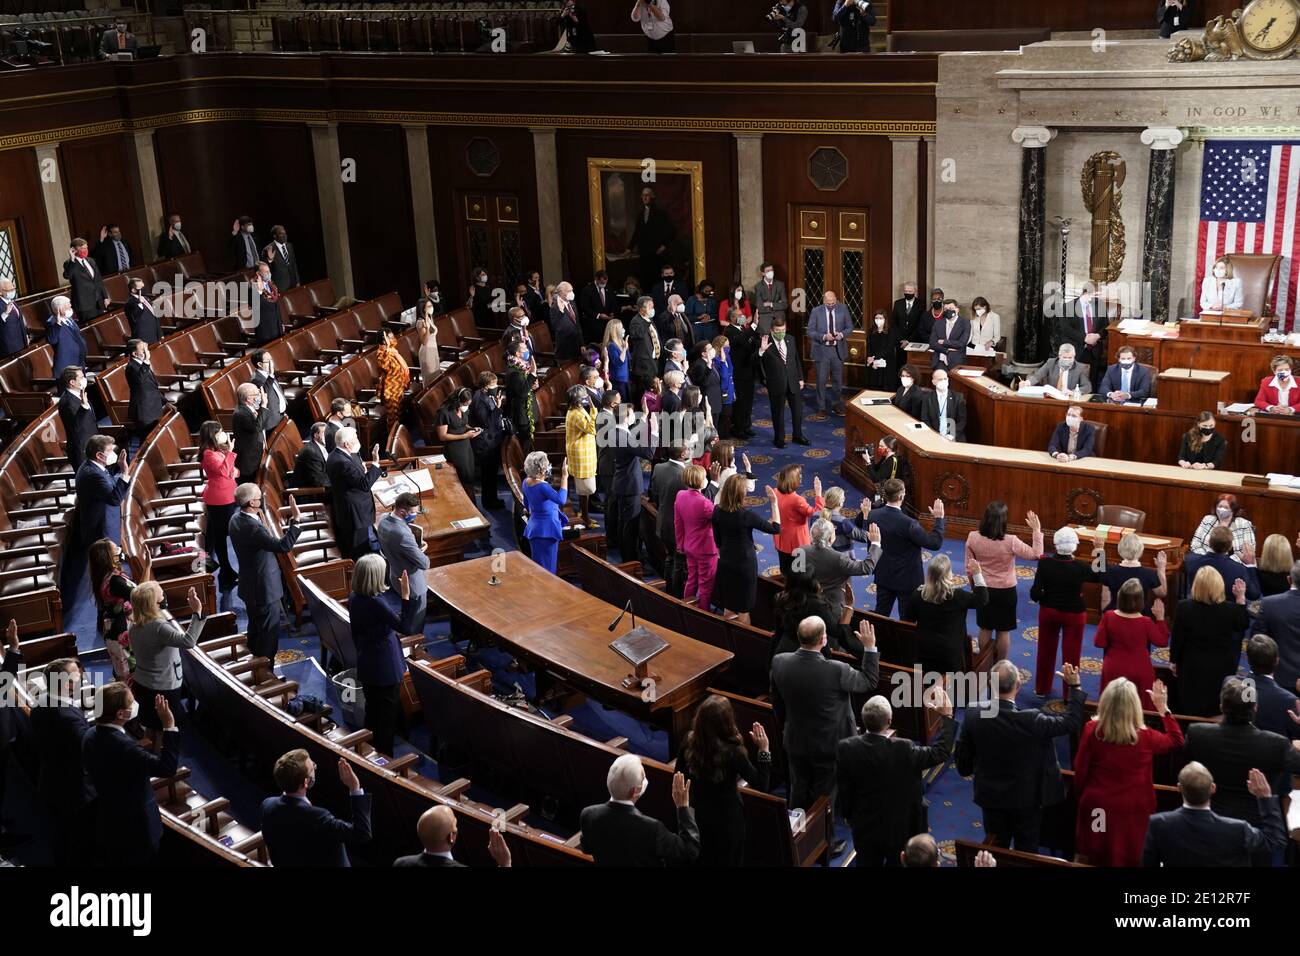 Washington, United States Of America. 03rd Jan, 2021. Democratic members of the United States House of Representatives take their oath of office administered by Speaker of the House Nancy Pelosi on the floor of the House Chamber during the first session of the 117th Congress on Capitol Hill in Washington, U.S., January 3, 2021. Credit: Erin Scott/Pool via CNP | usage worldwide Credit: dpa/Alamy Live News Stock Photo